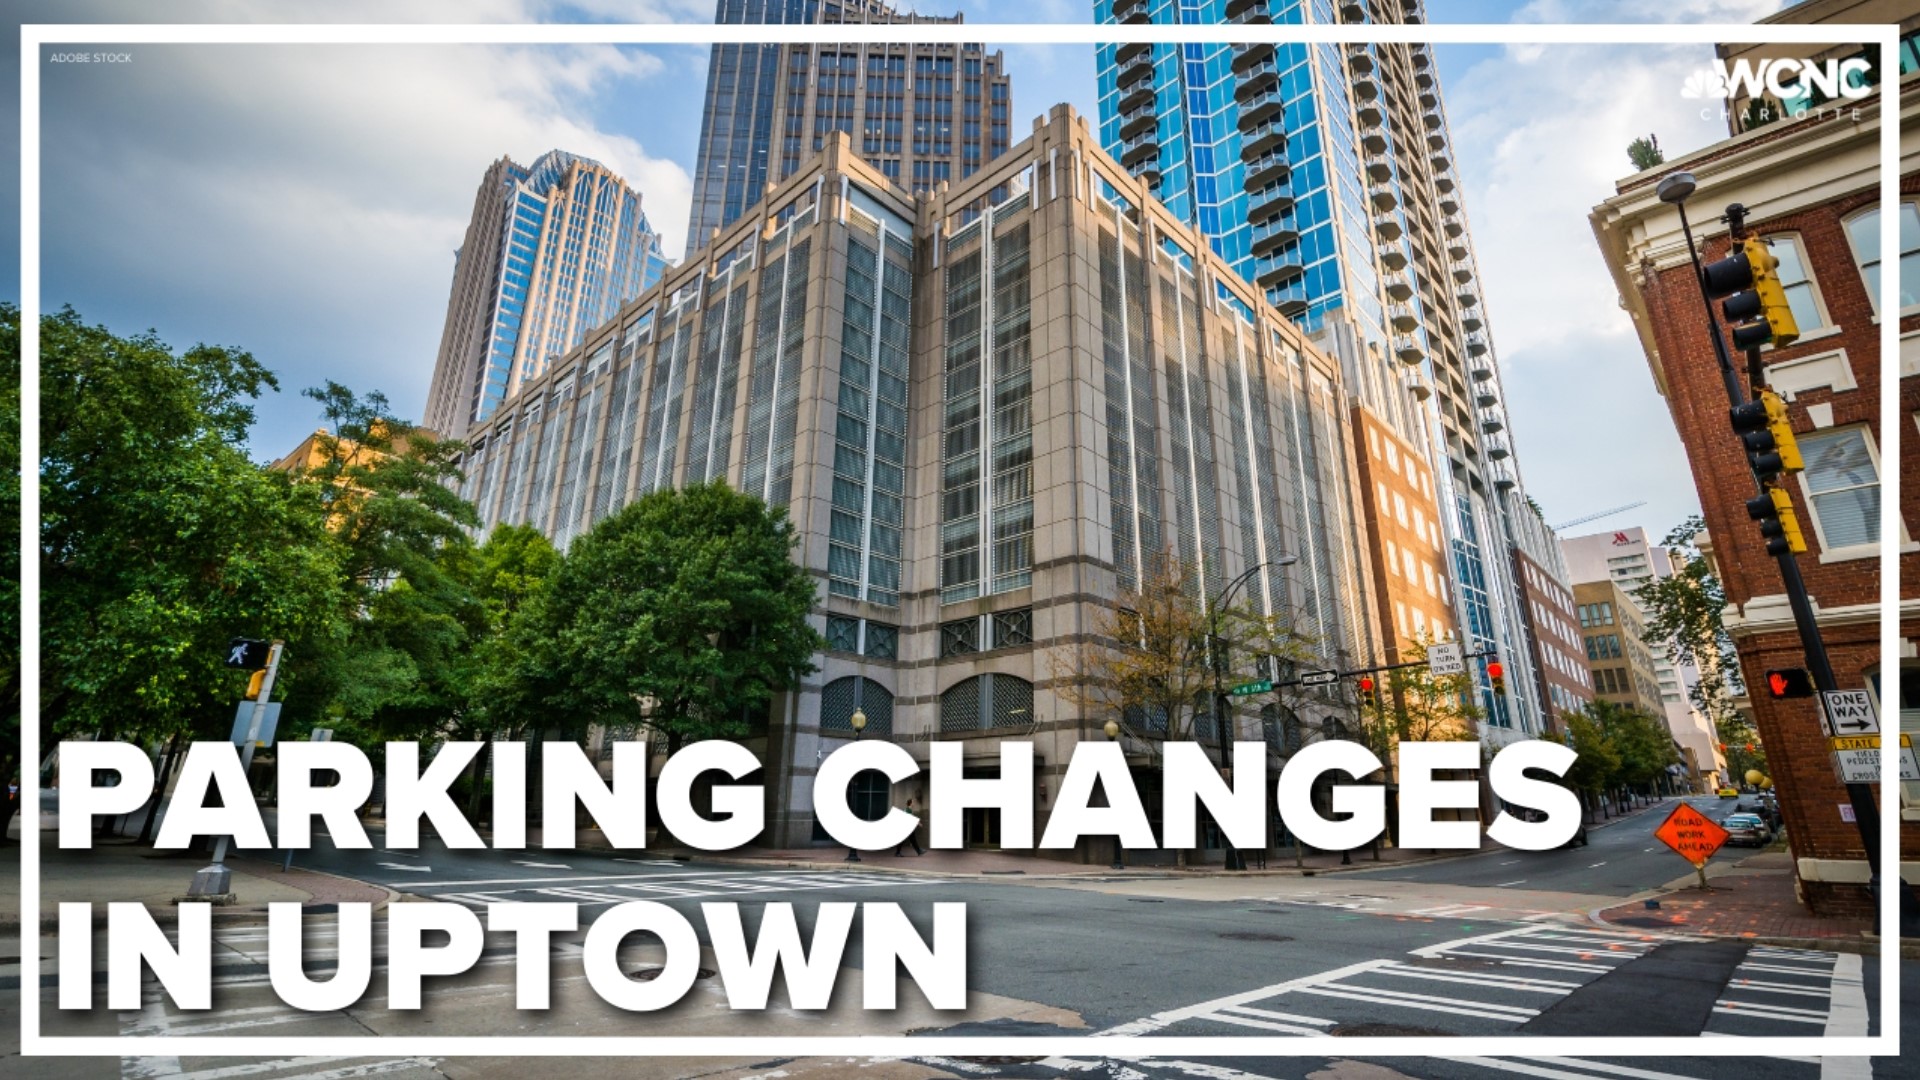 You'll be paying a little bit more money to park in South End and Uptown. The fifty cent per hour increase is part of the city's 2023 budget.